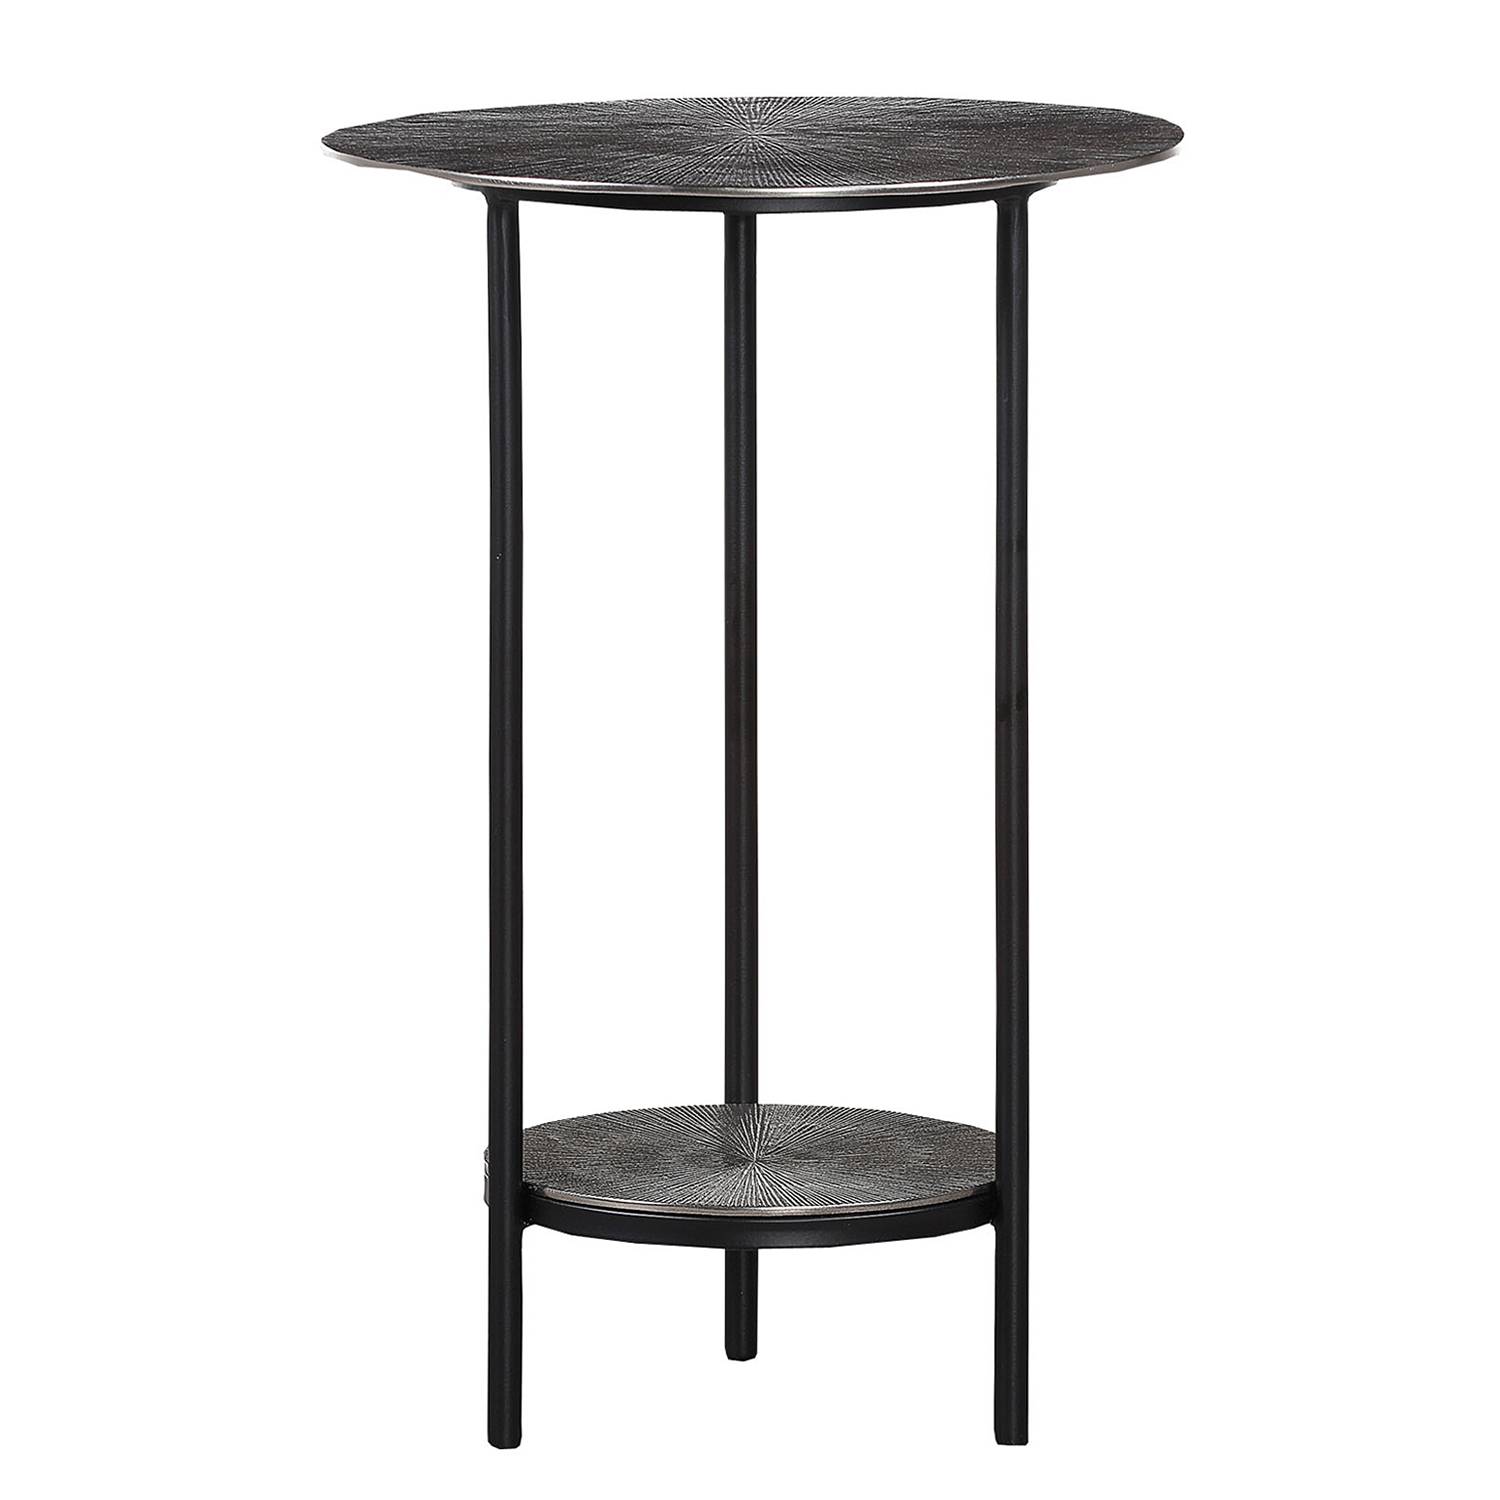 Table d'appoint Minano